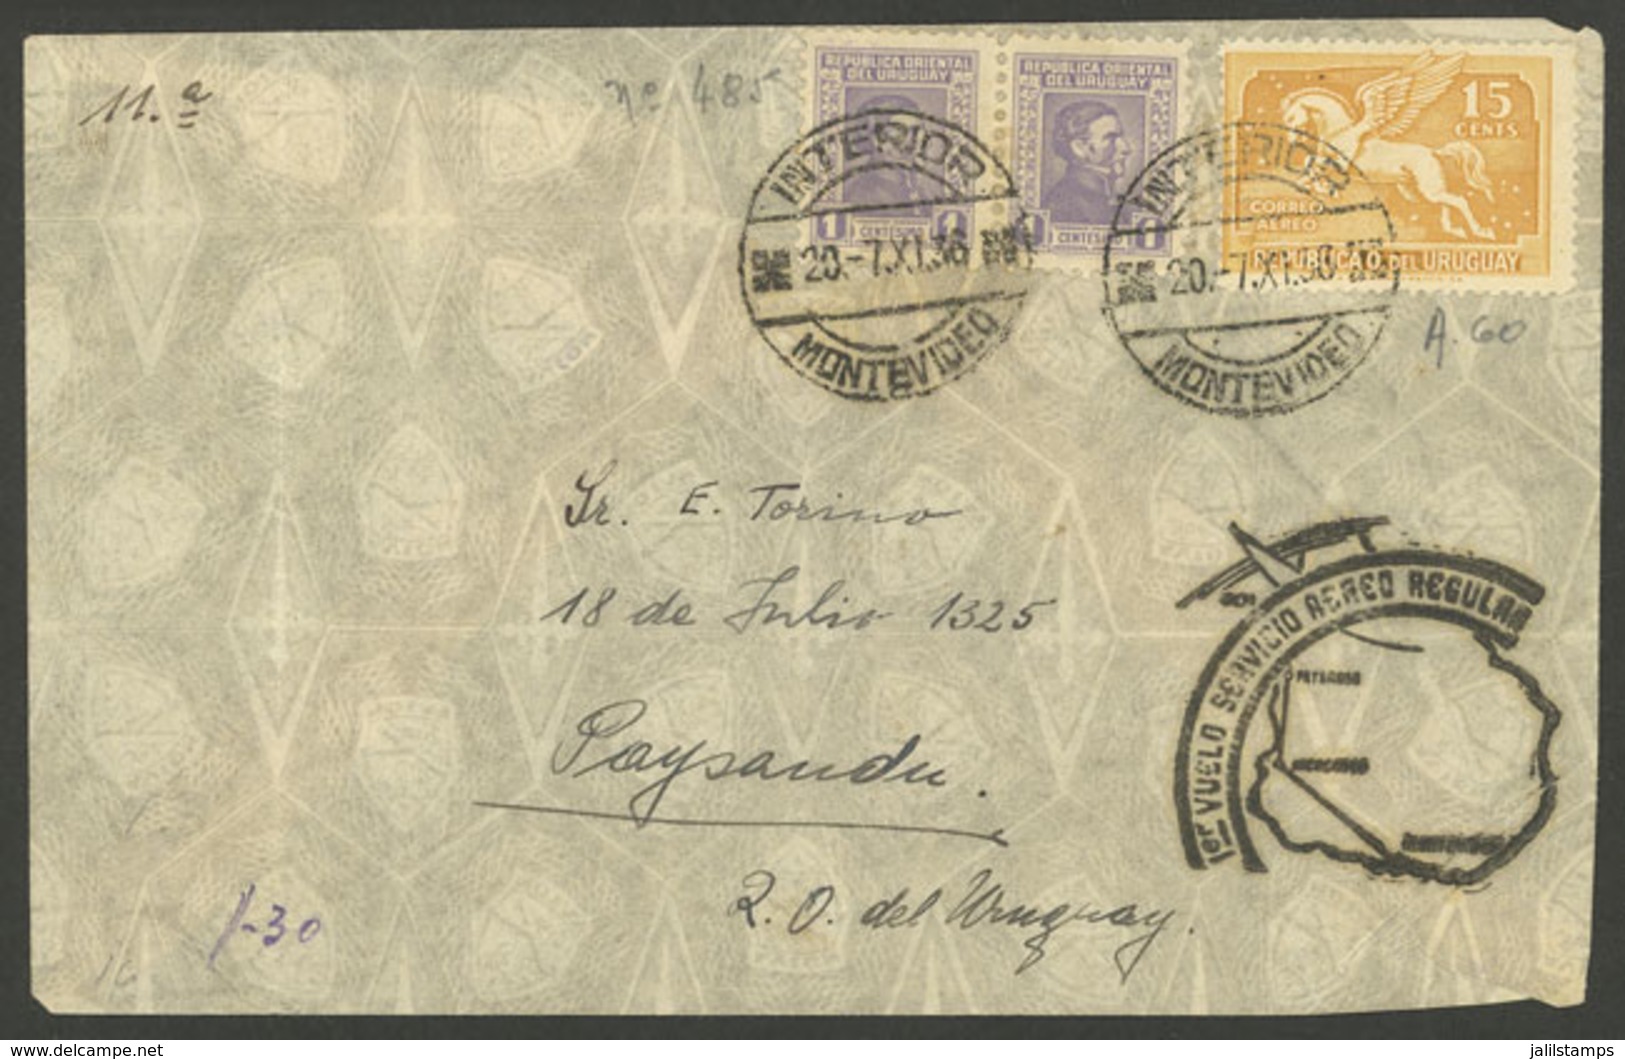 URUGUAY: 7/NO/1936 Montevideo - Paysandú, First Flight Of The Regular Airmail Service, With Special Cachet And Arrival M - Uruguay